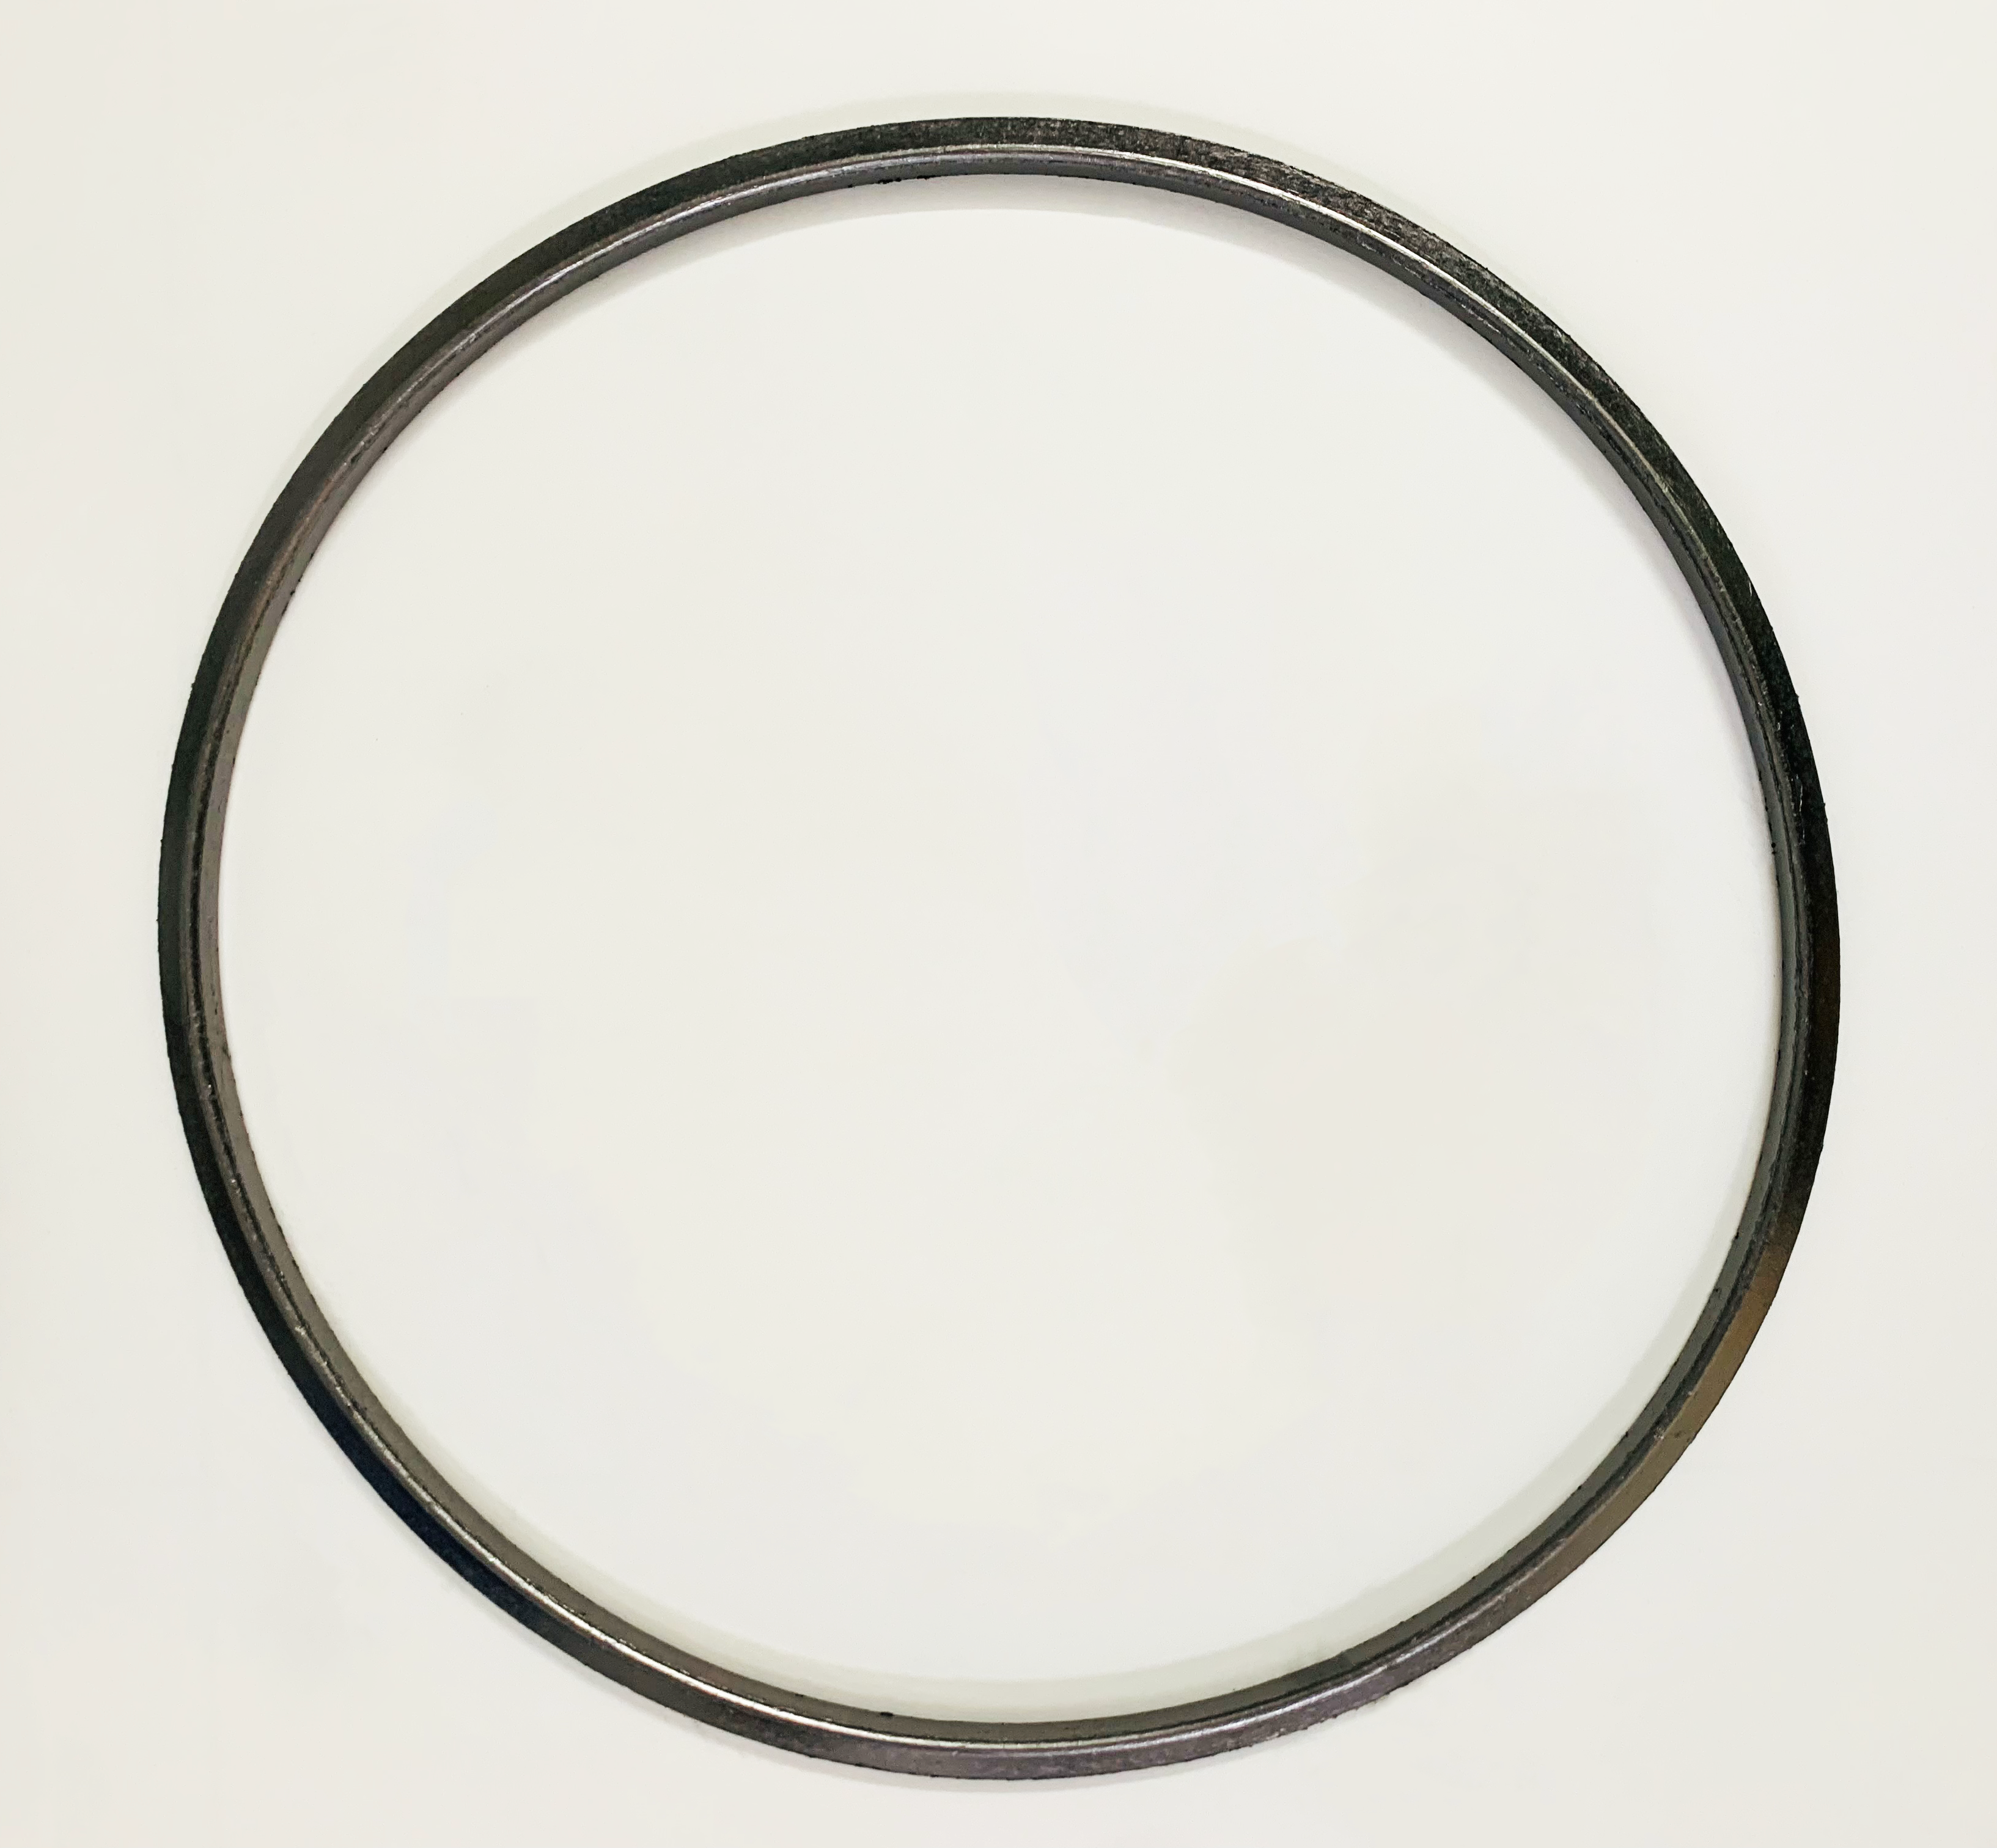 Veefit Clamp and Gasket Kit for IVECO Exhaust Purification System 5801651206 5801651206